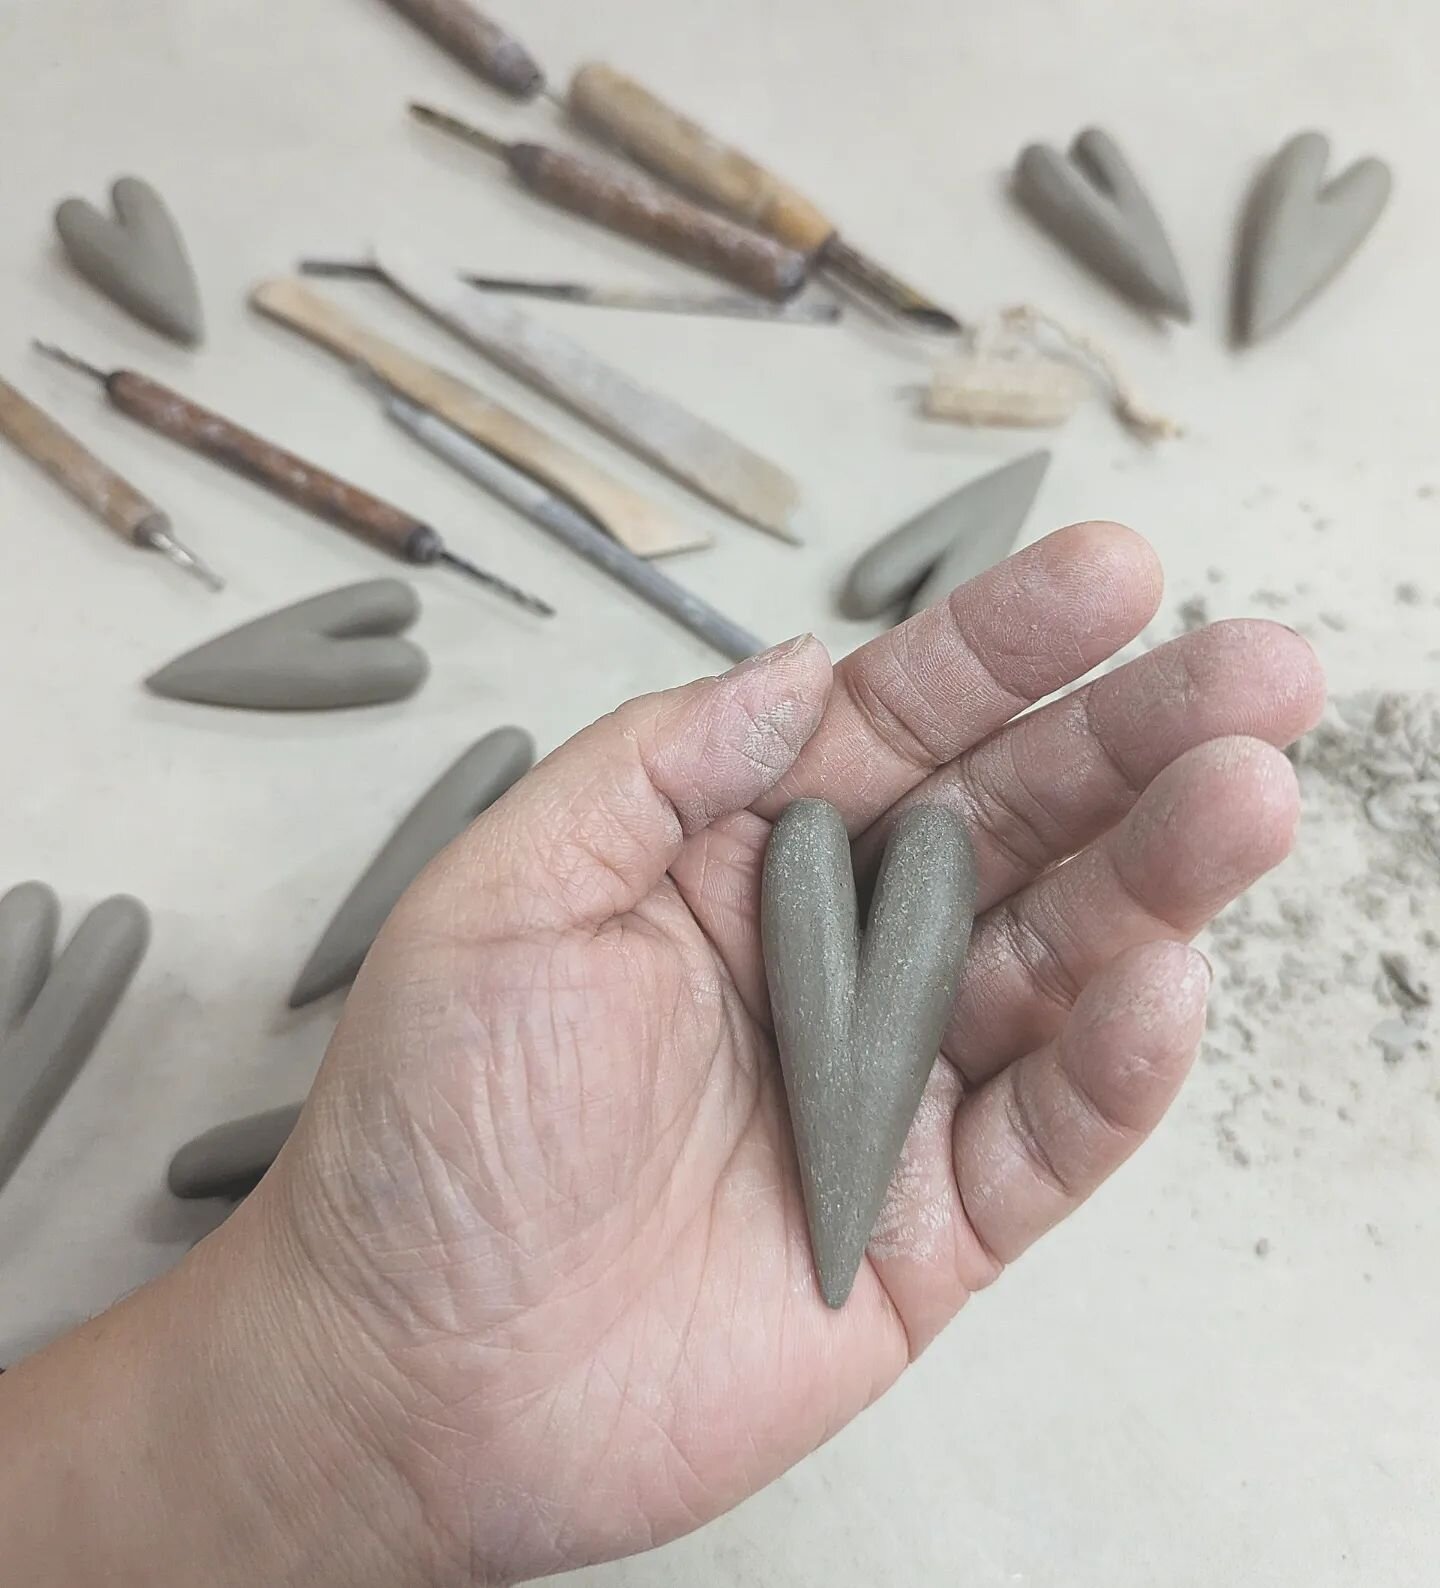 We've taken most of January to reflect, rejuvenate and practice our self care rituals. And, our clay practice is one of the rituals we use to meditate and process our inner thoughts.

Hearts have always been a significant symbol in our work &amp; lif